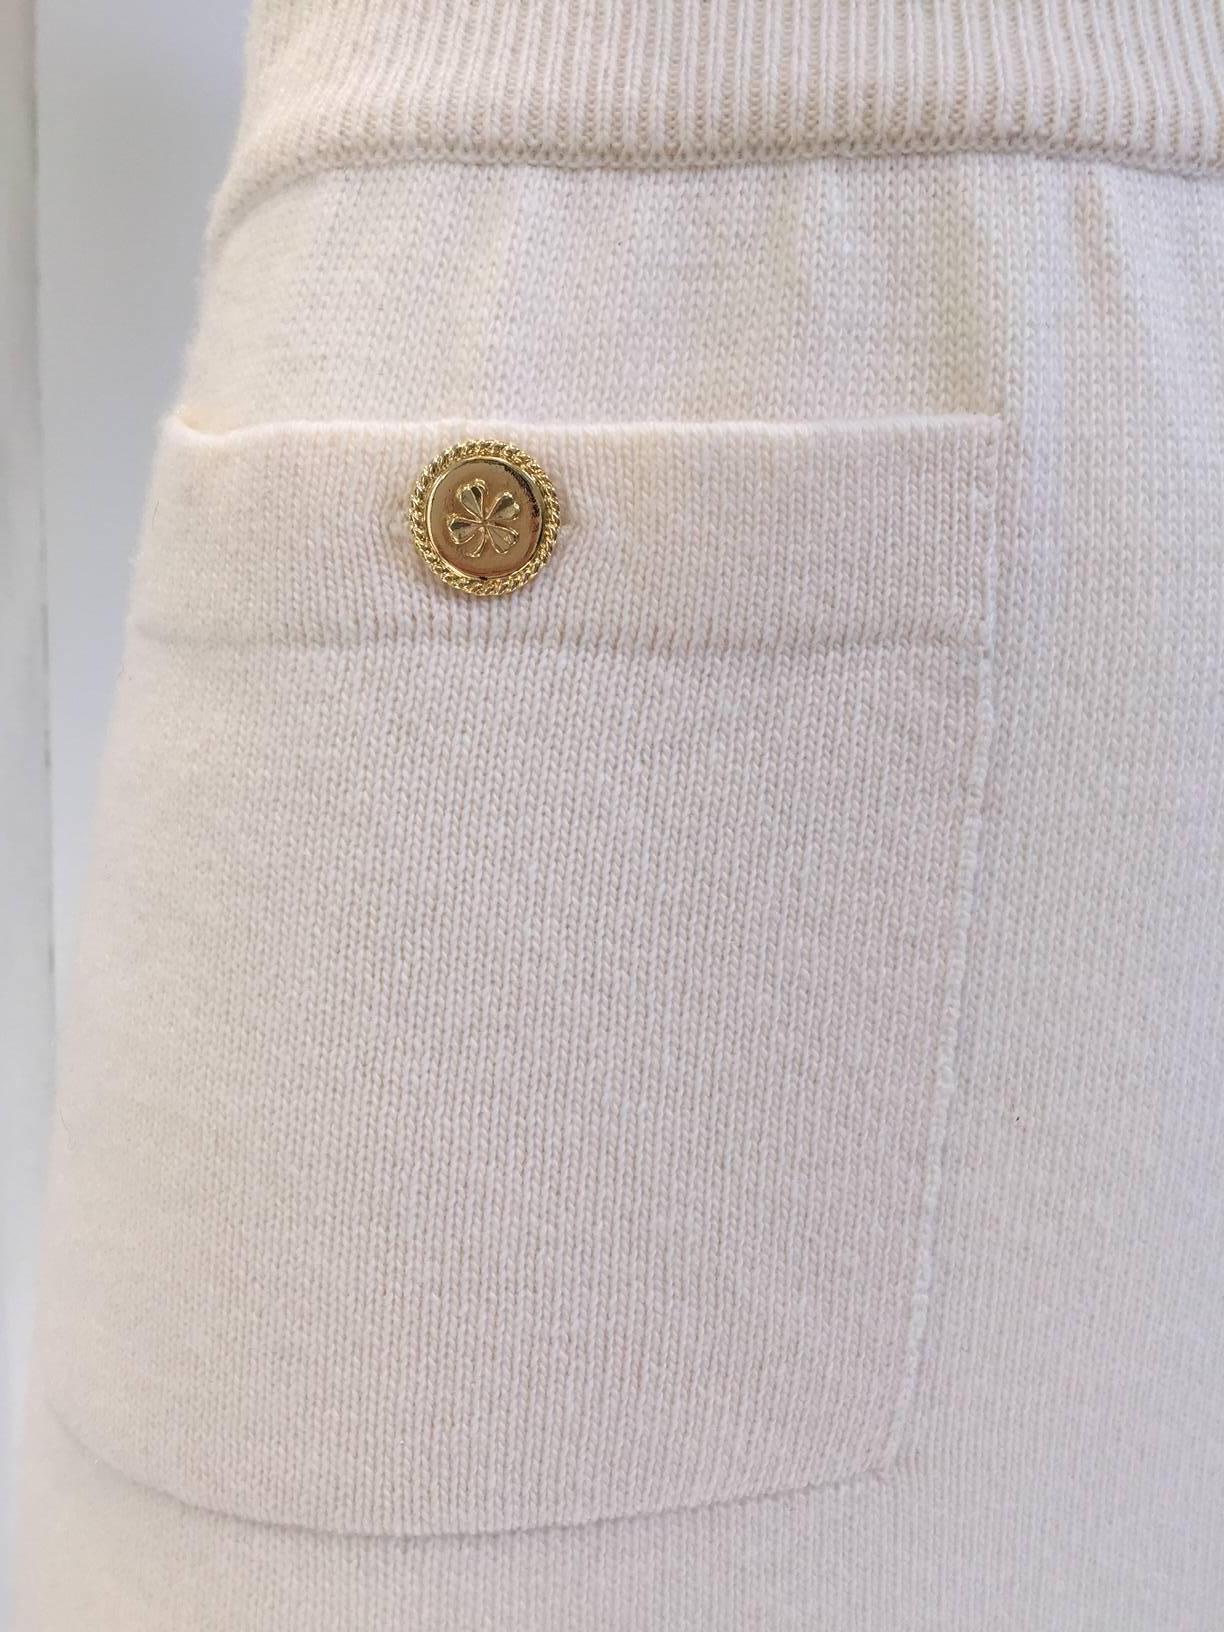 Vintage 1980s CHANEL Creme Cashmere Mini Skirt. Small Front pocket with small gold camelia button. Skirt is in mint condition.
Waist : 24” stretch up to 26”  / Hip: 32” stretch up to 34” / Skirt length 20”


